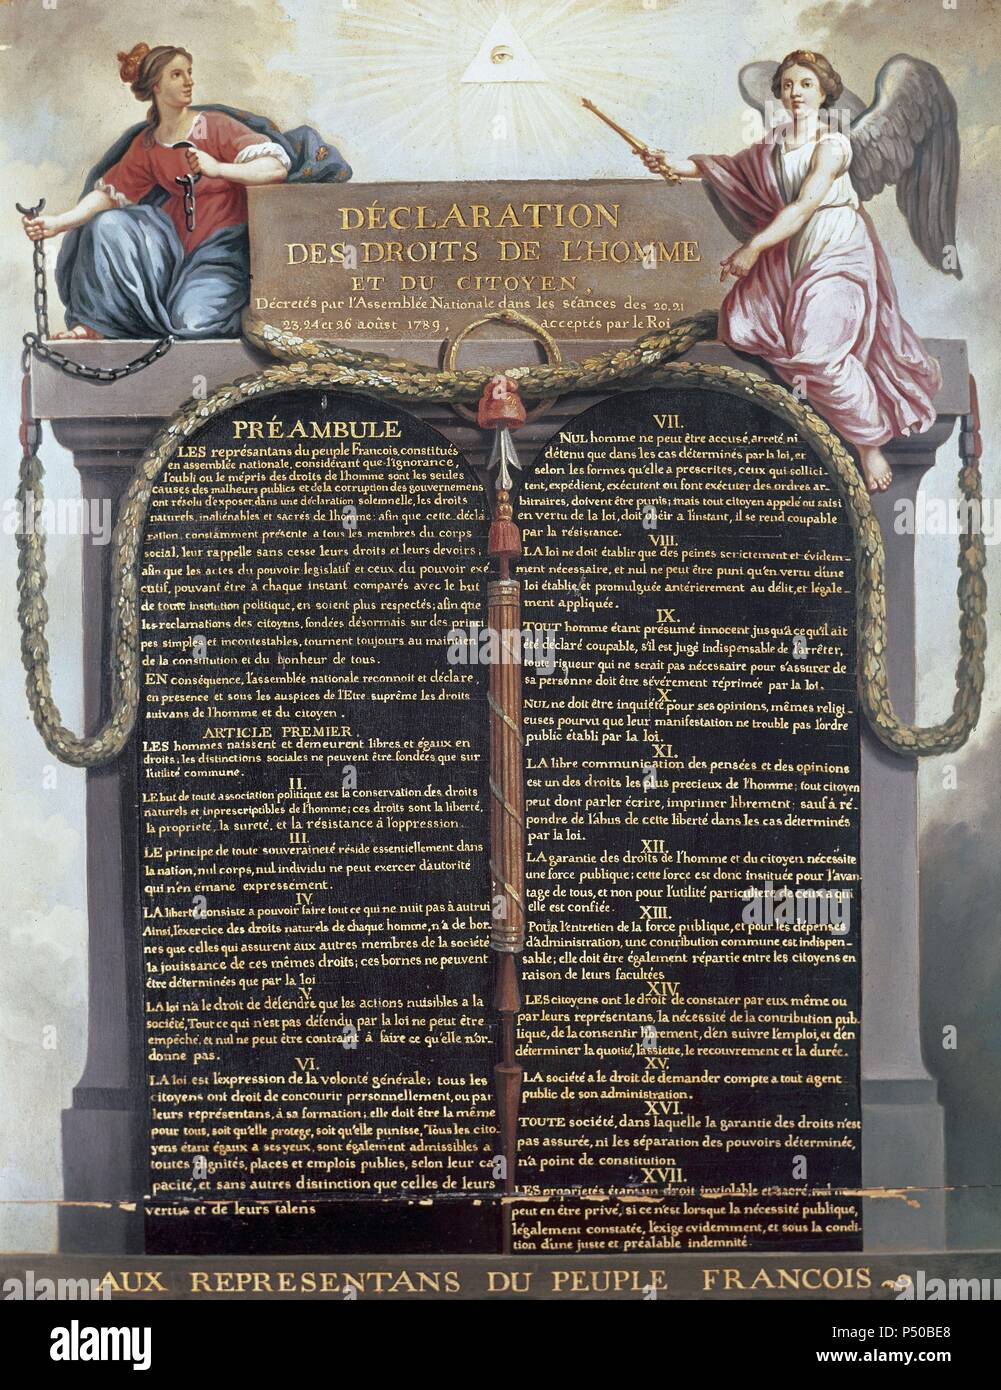 Declaration of the Rights of Man and of the Citizen. Act passed in France by the Constituent Assembly on August 26, 1789 with seventeen articles that define the rights of citizens and the nation. It is a fundamental document of French Revolution. Carnavalet Museum. Paris. France. Stock Photo